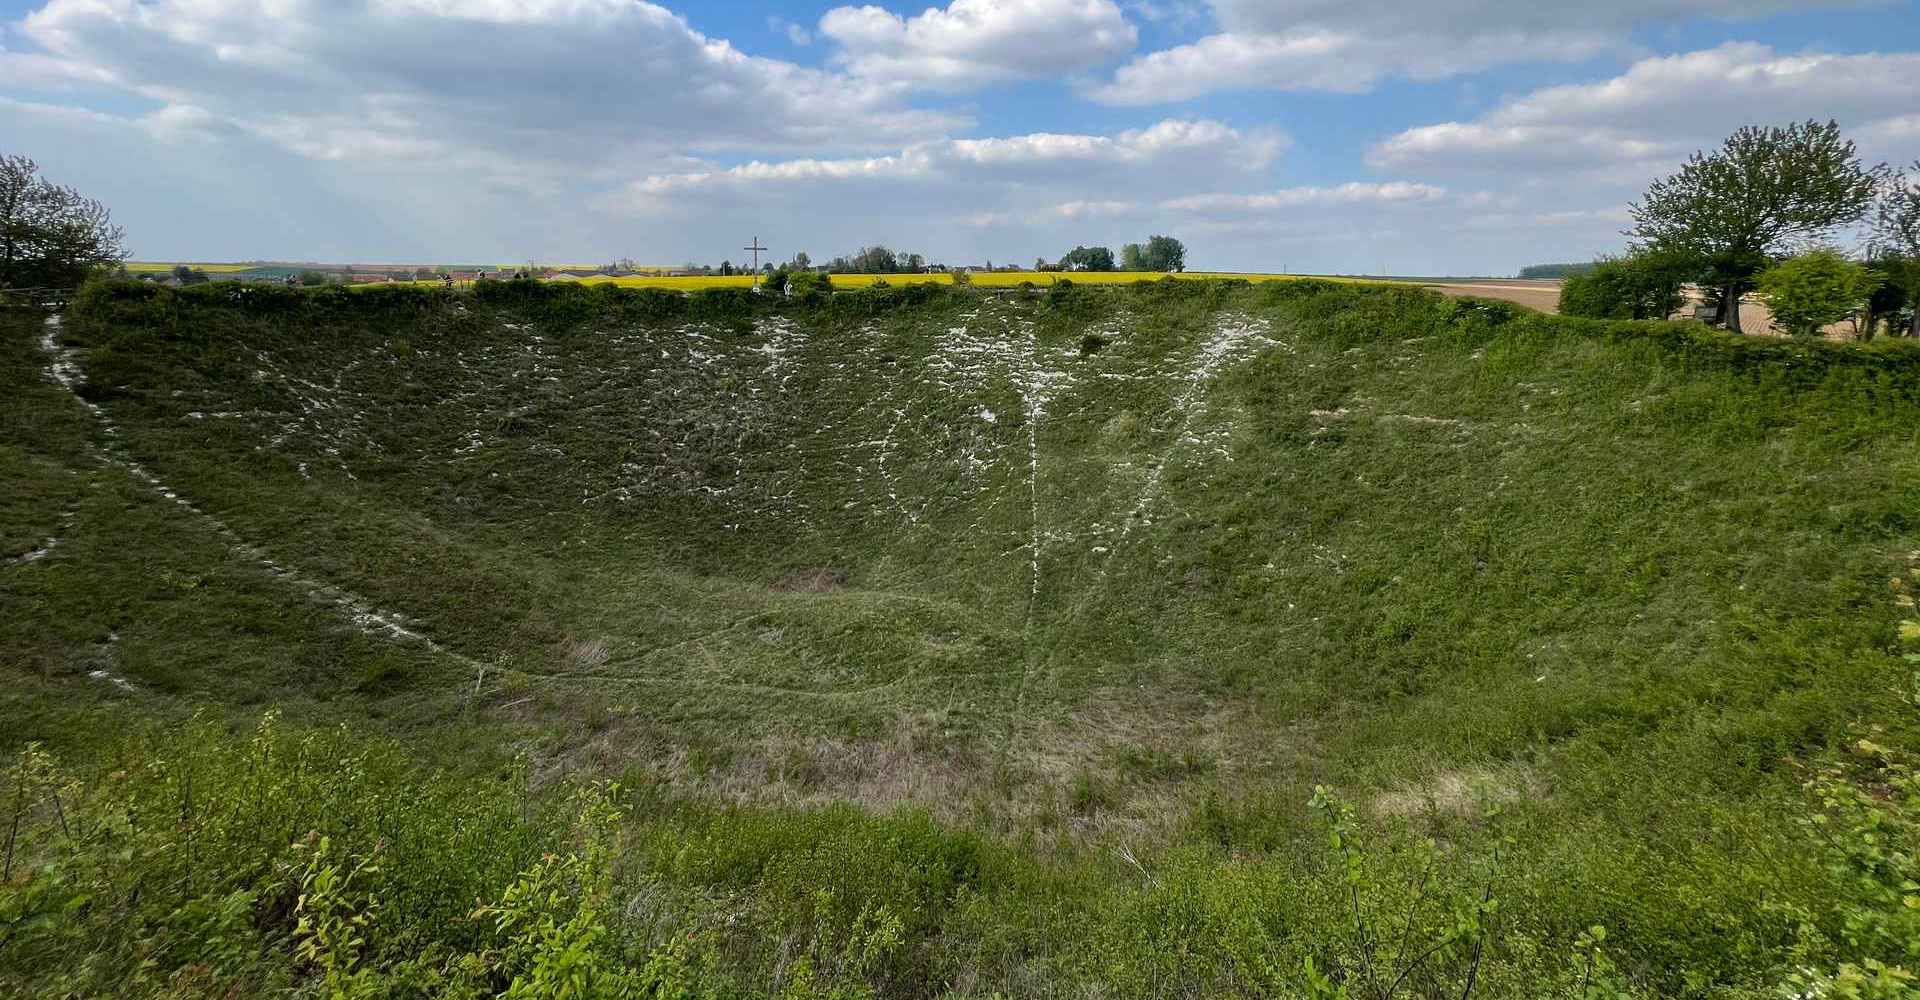 Lochnagar Crater, France. The Battle of the Somme